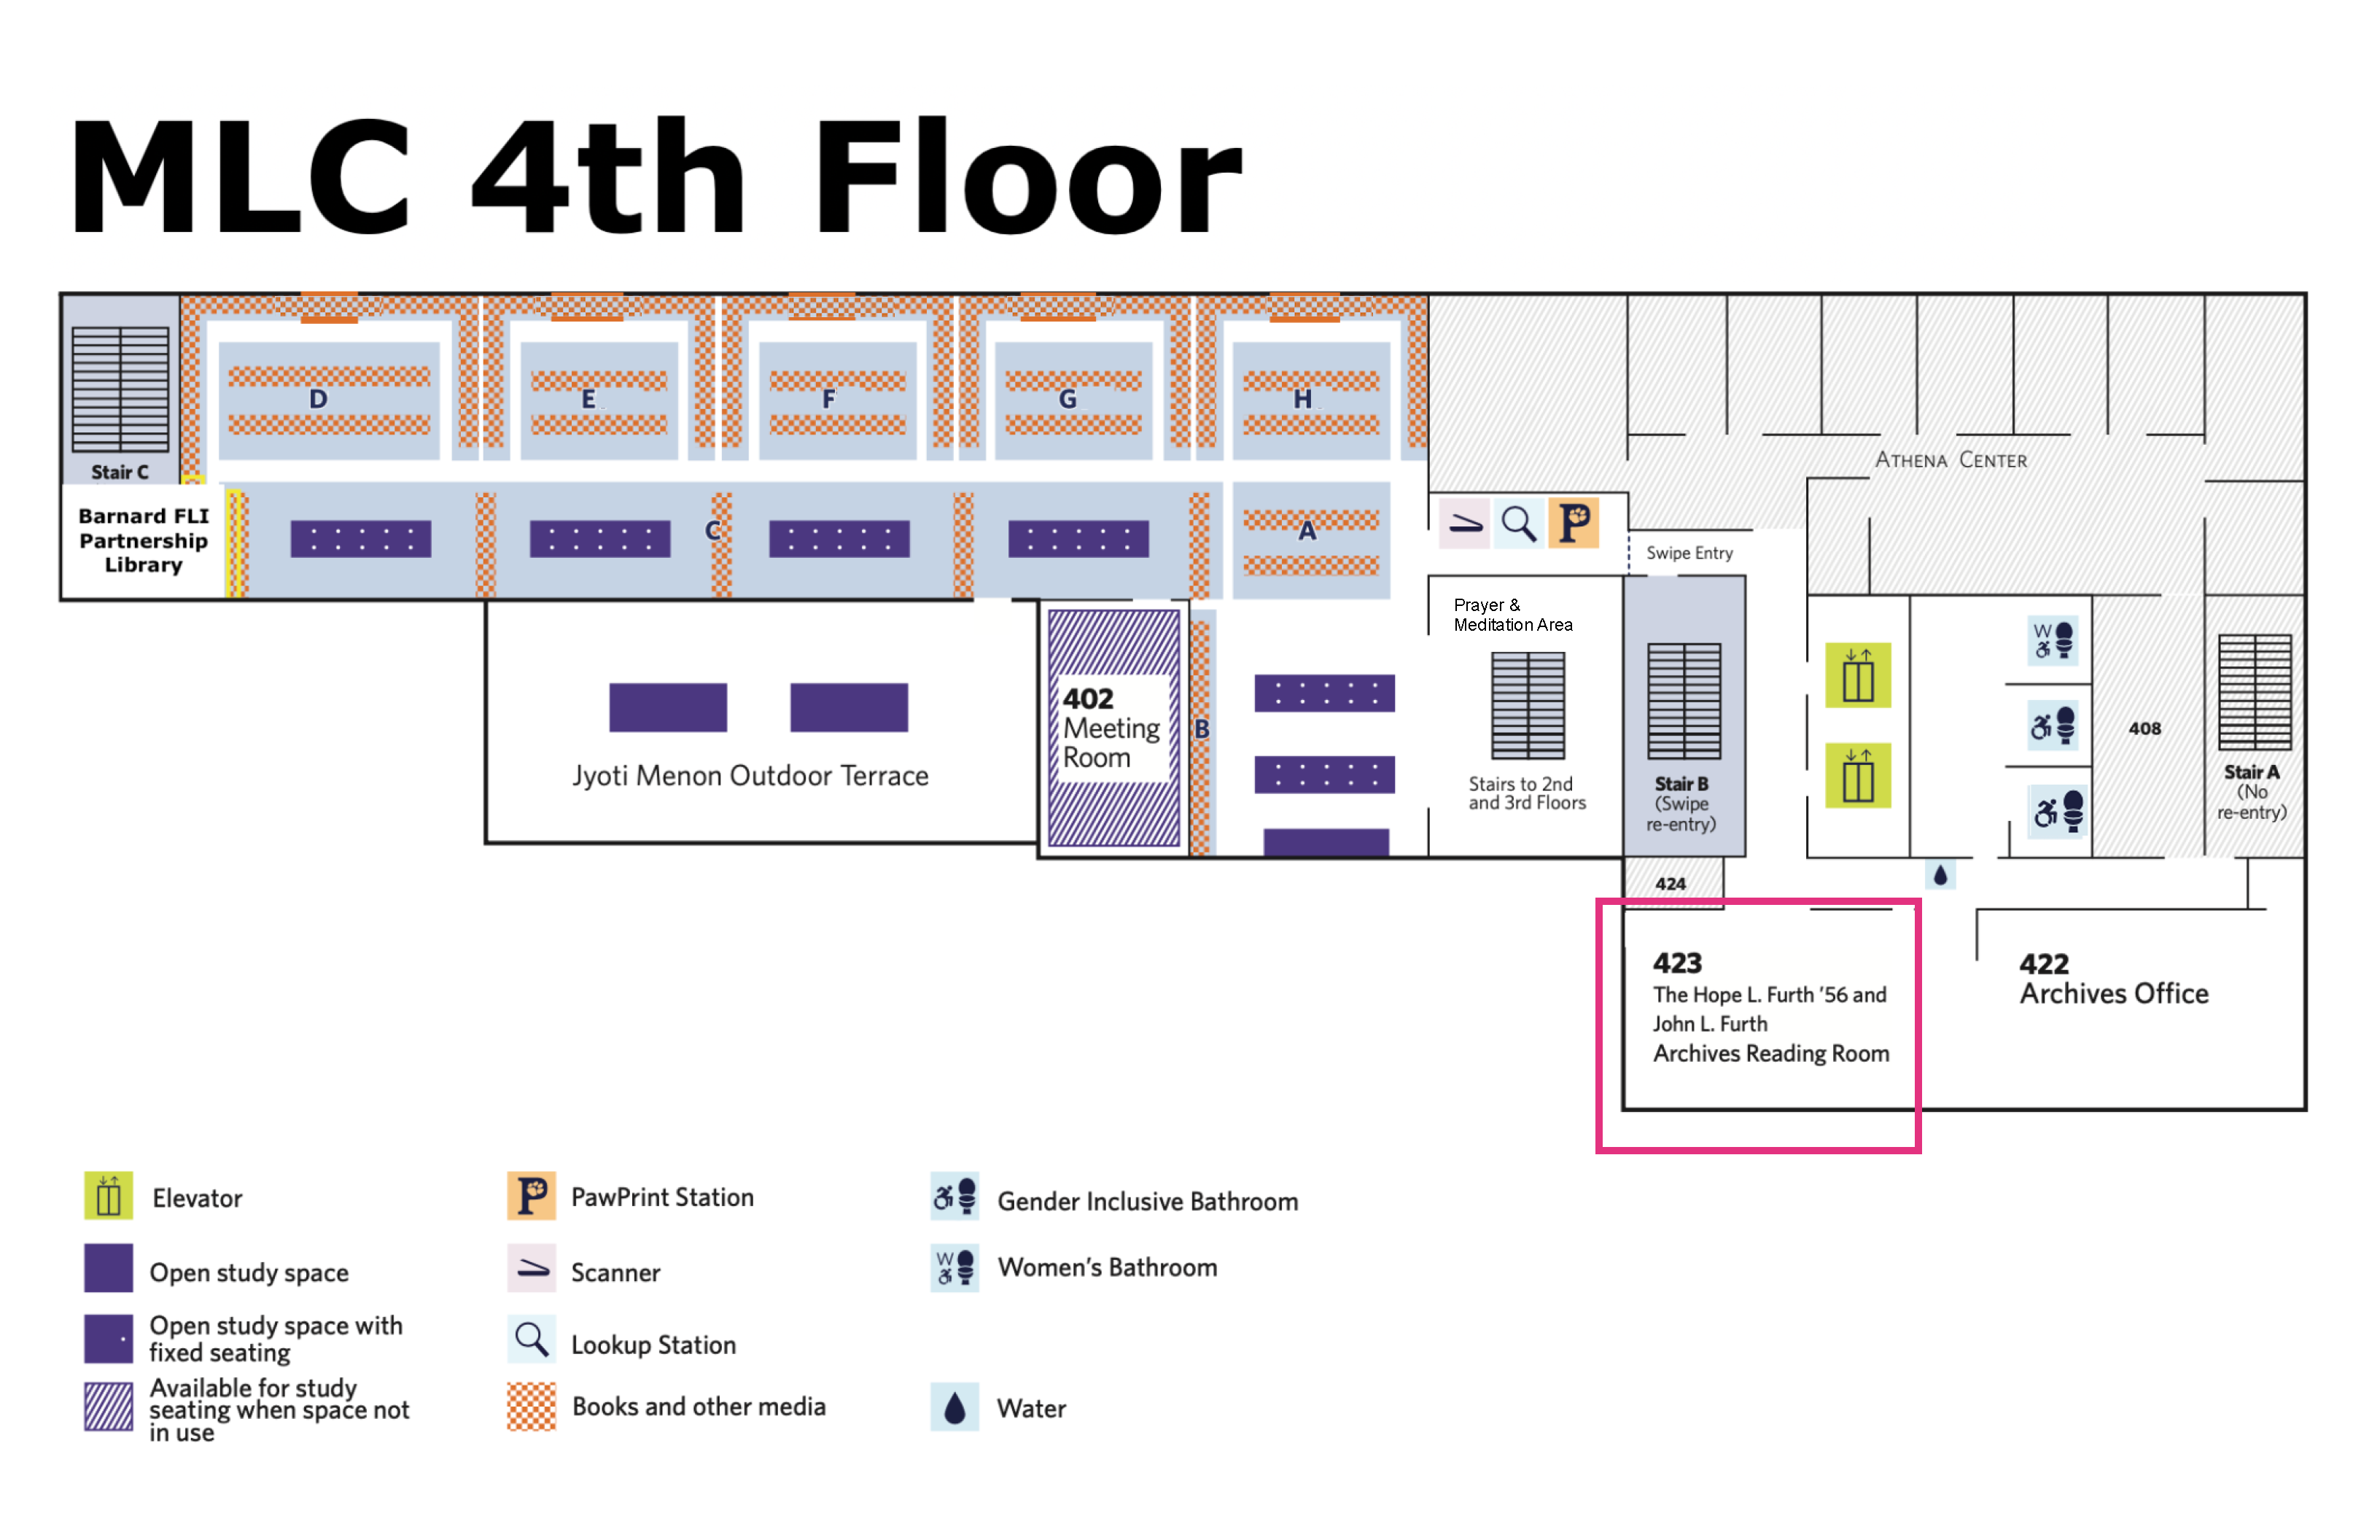 Map of the 4th floor of the Milstein Center showing the Archives reading room outlined in pink